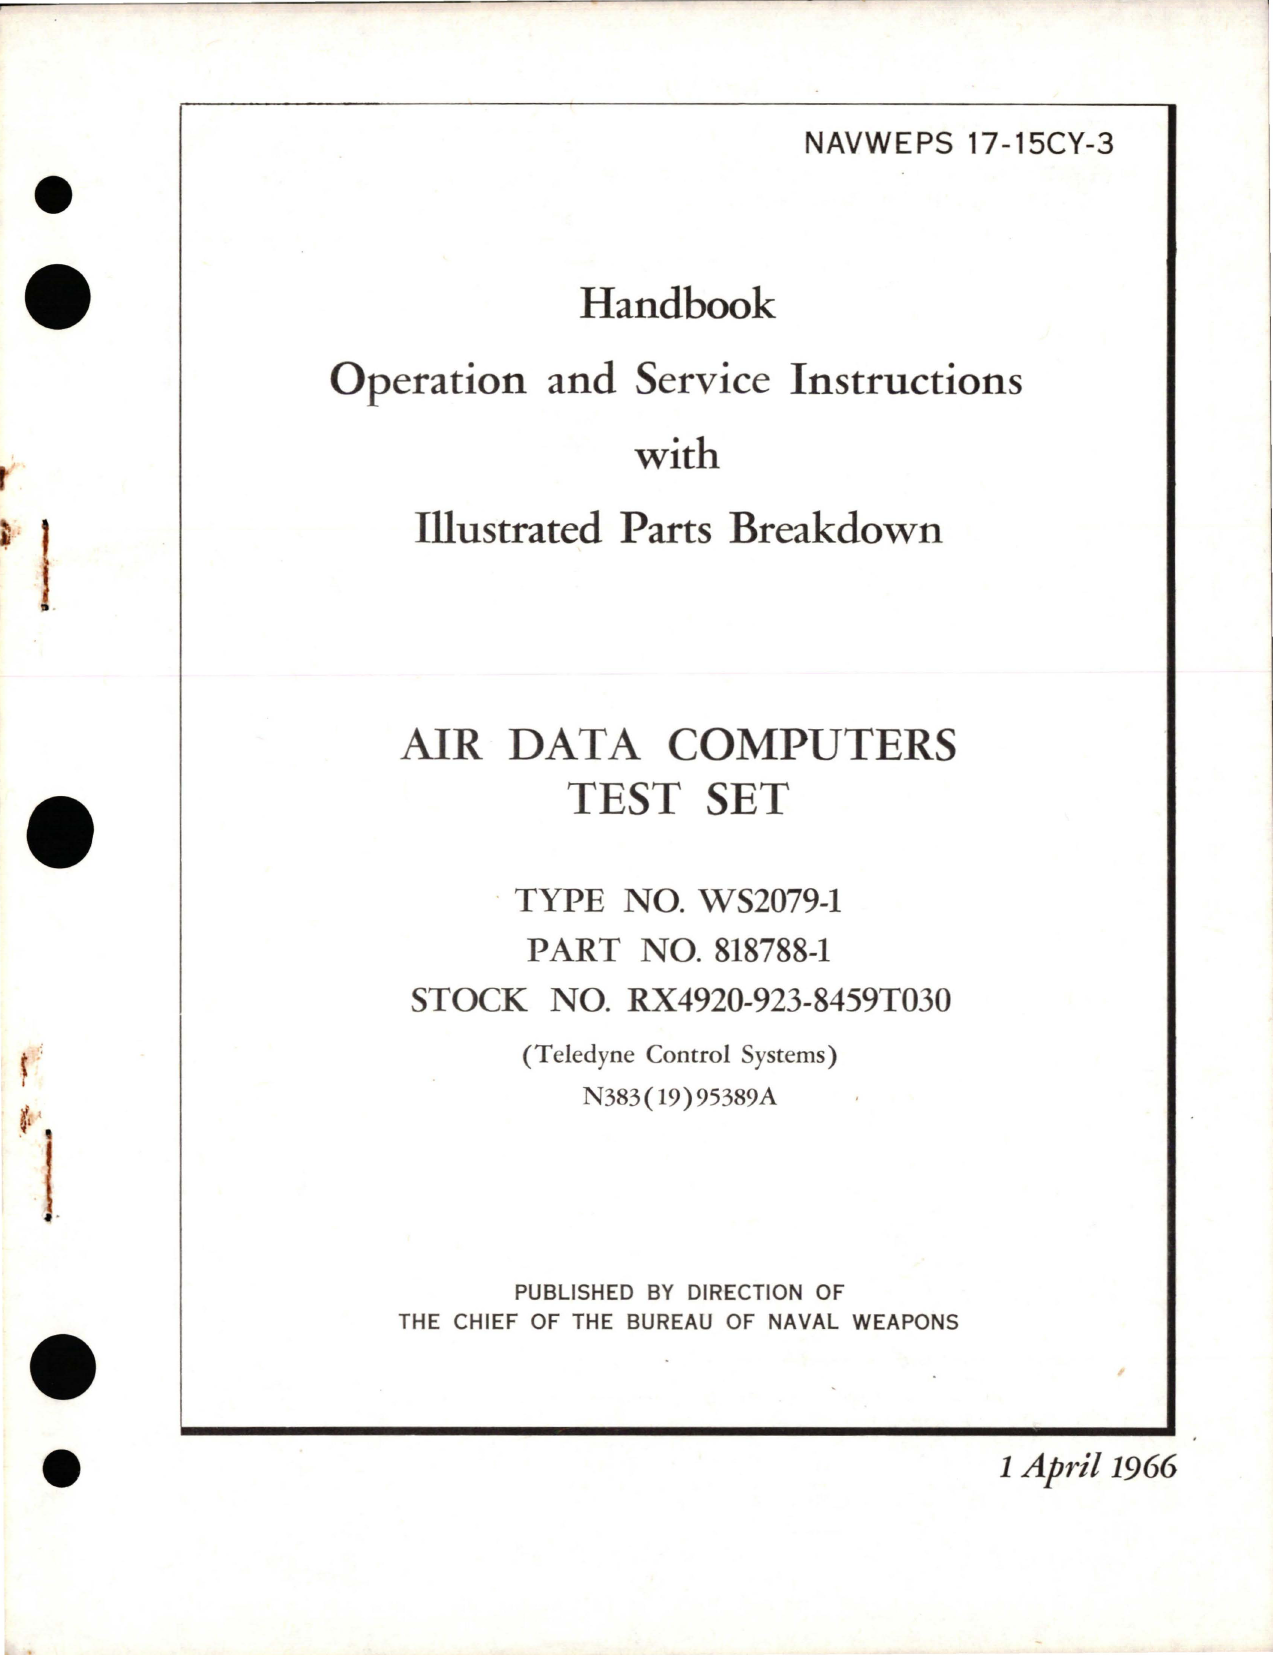 Sample page 1 from AirCorps Library document: Operation and Service Instructions with Parts for Air Data Computers Test Set - Type WS2079-1, Part 818788-1 